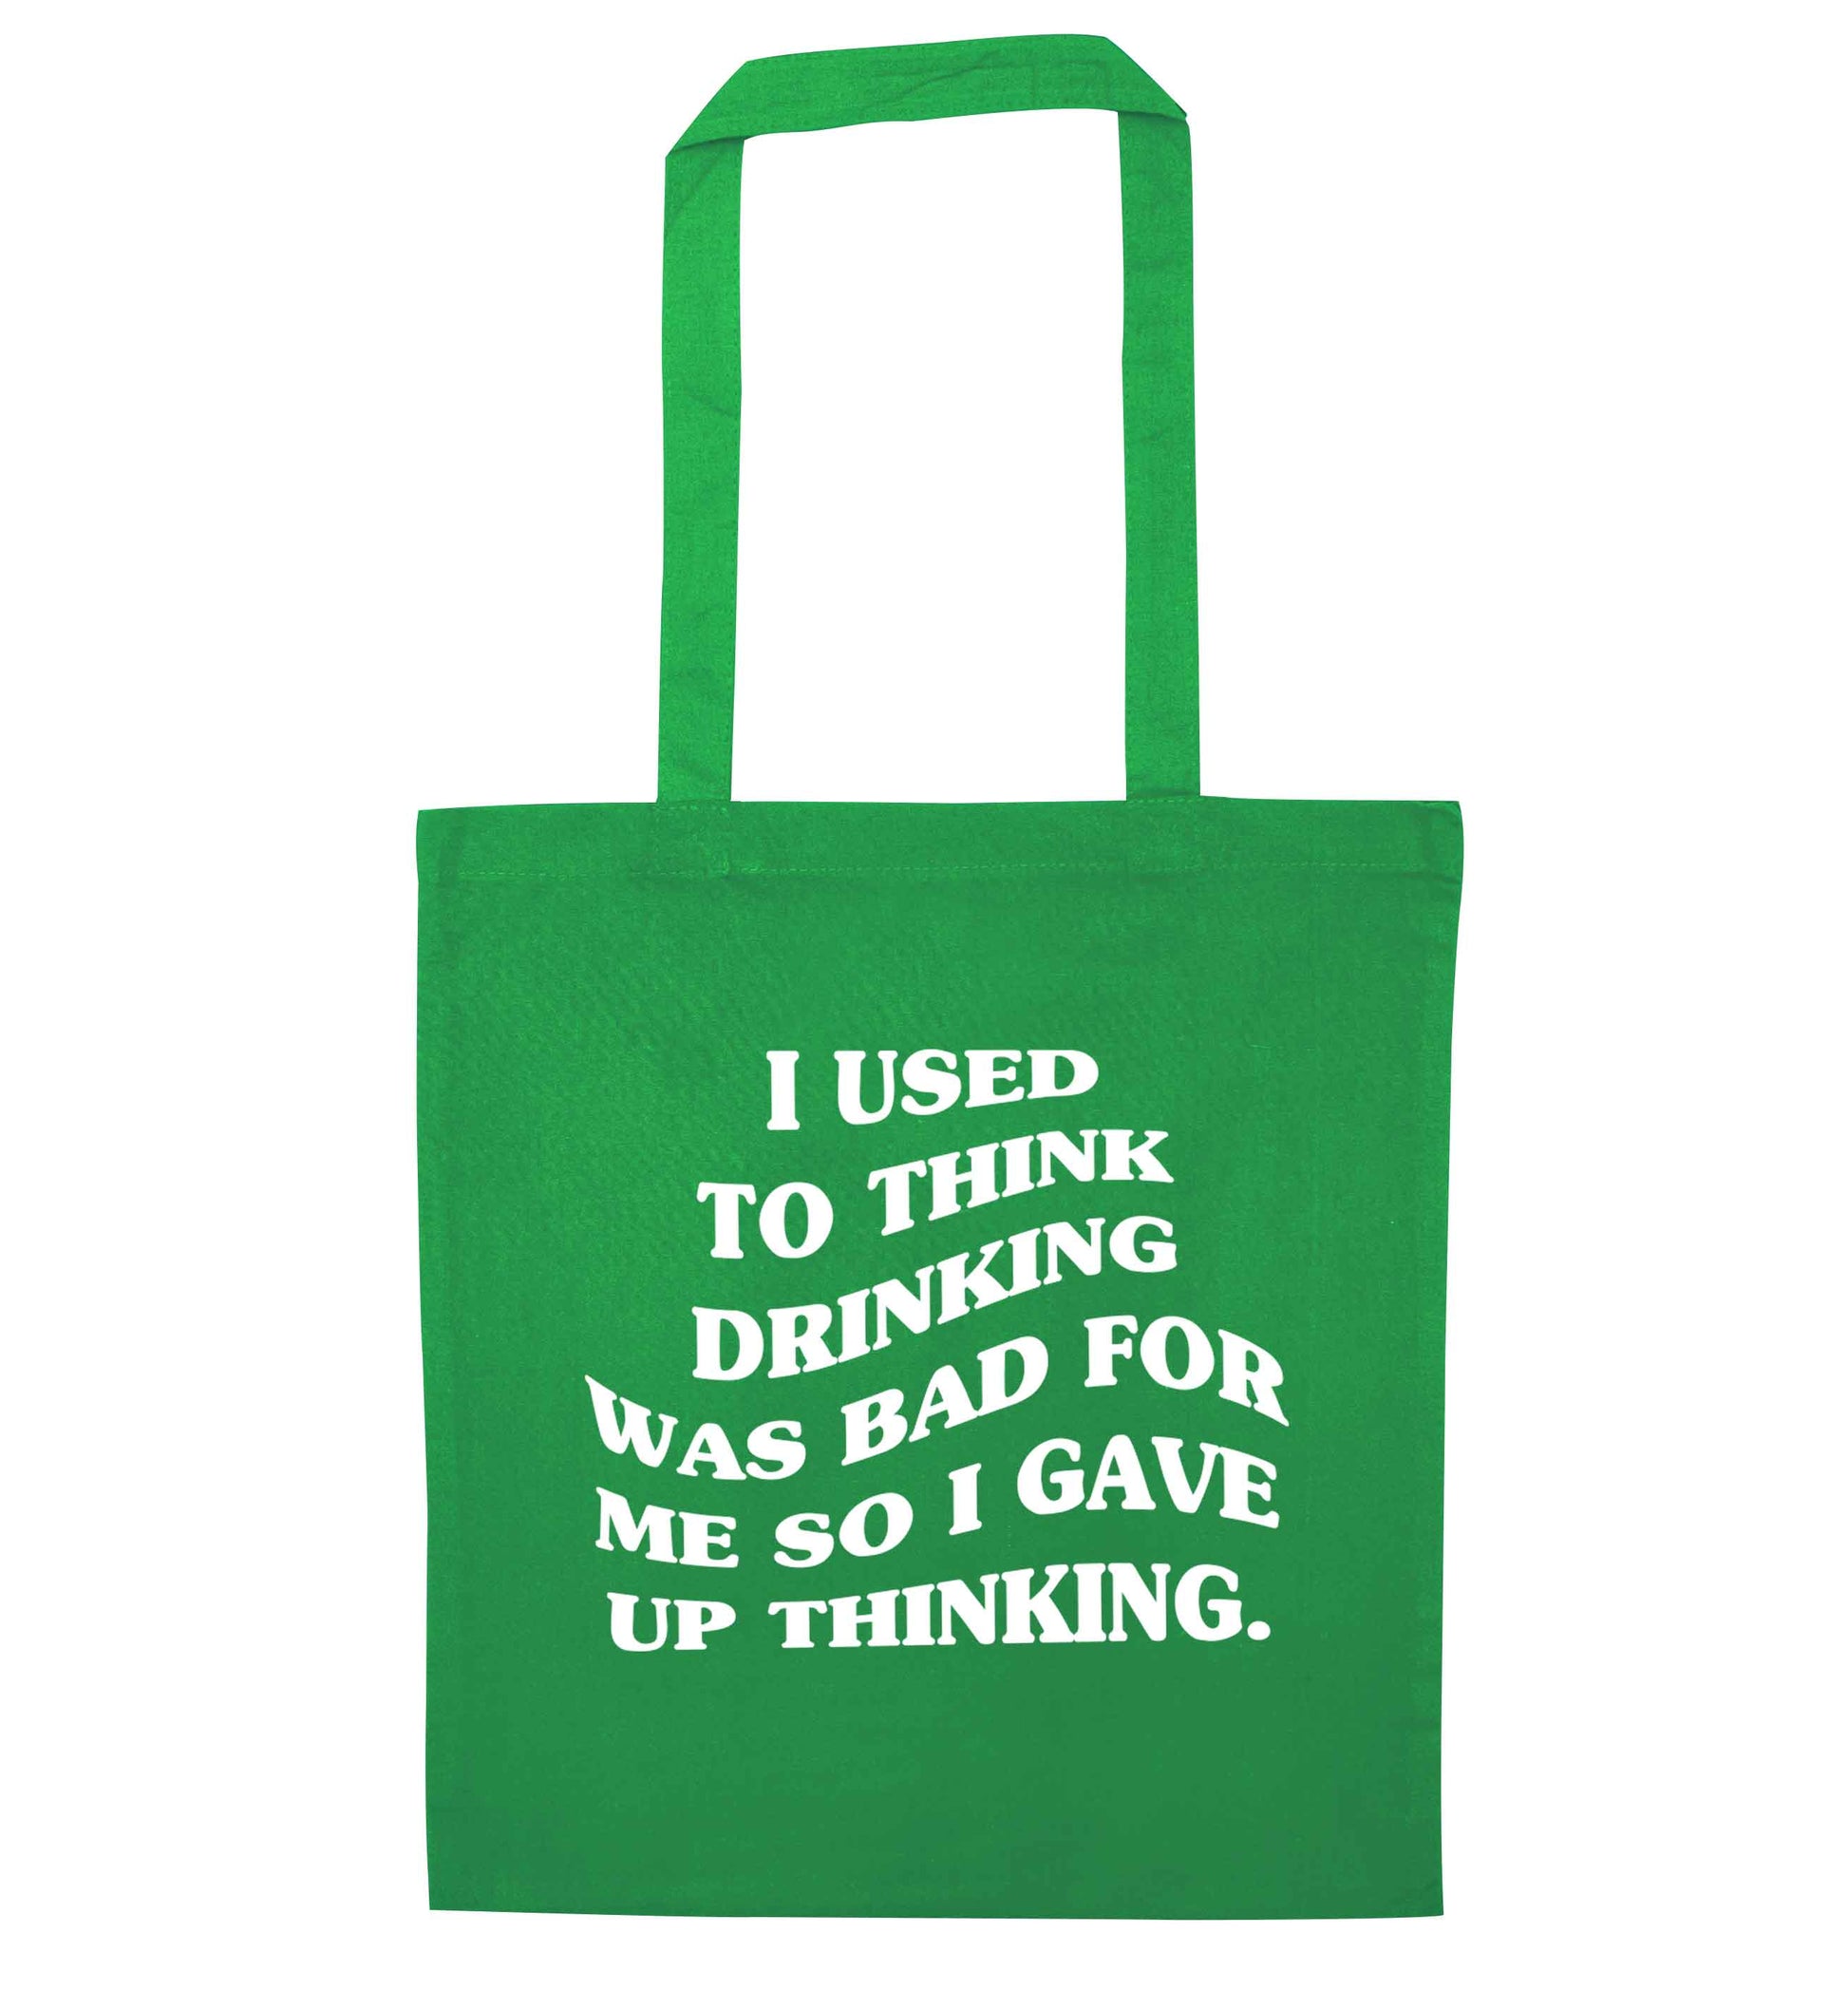 I used to think drinking was bad so I gave up thinking green tote bag